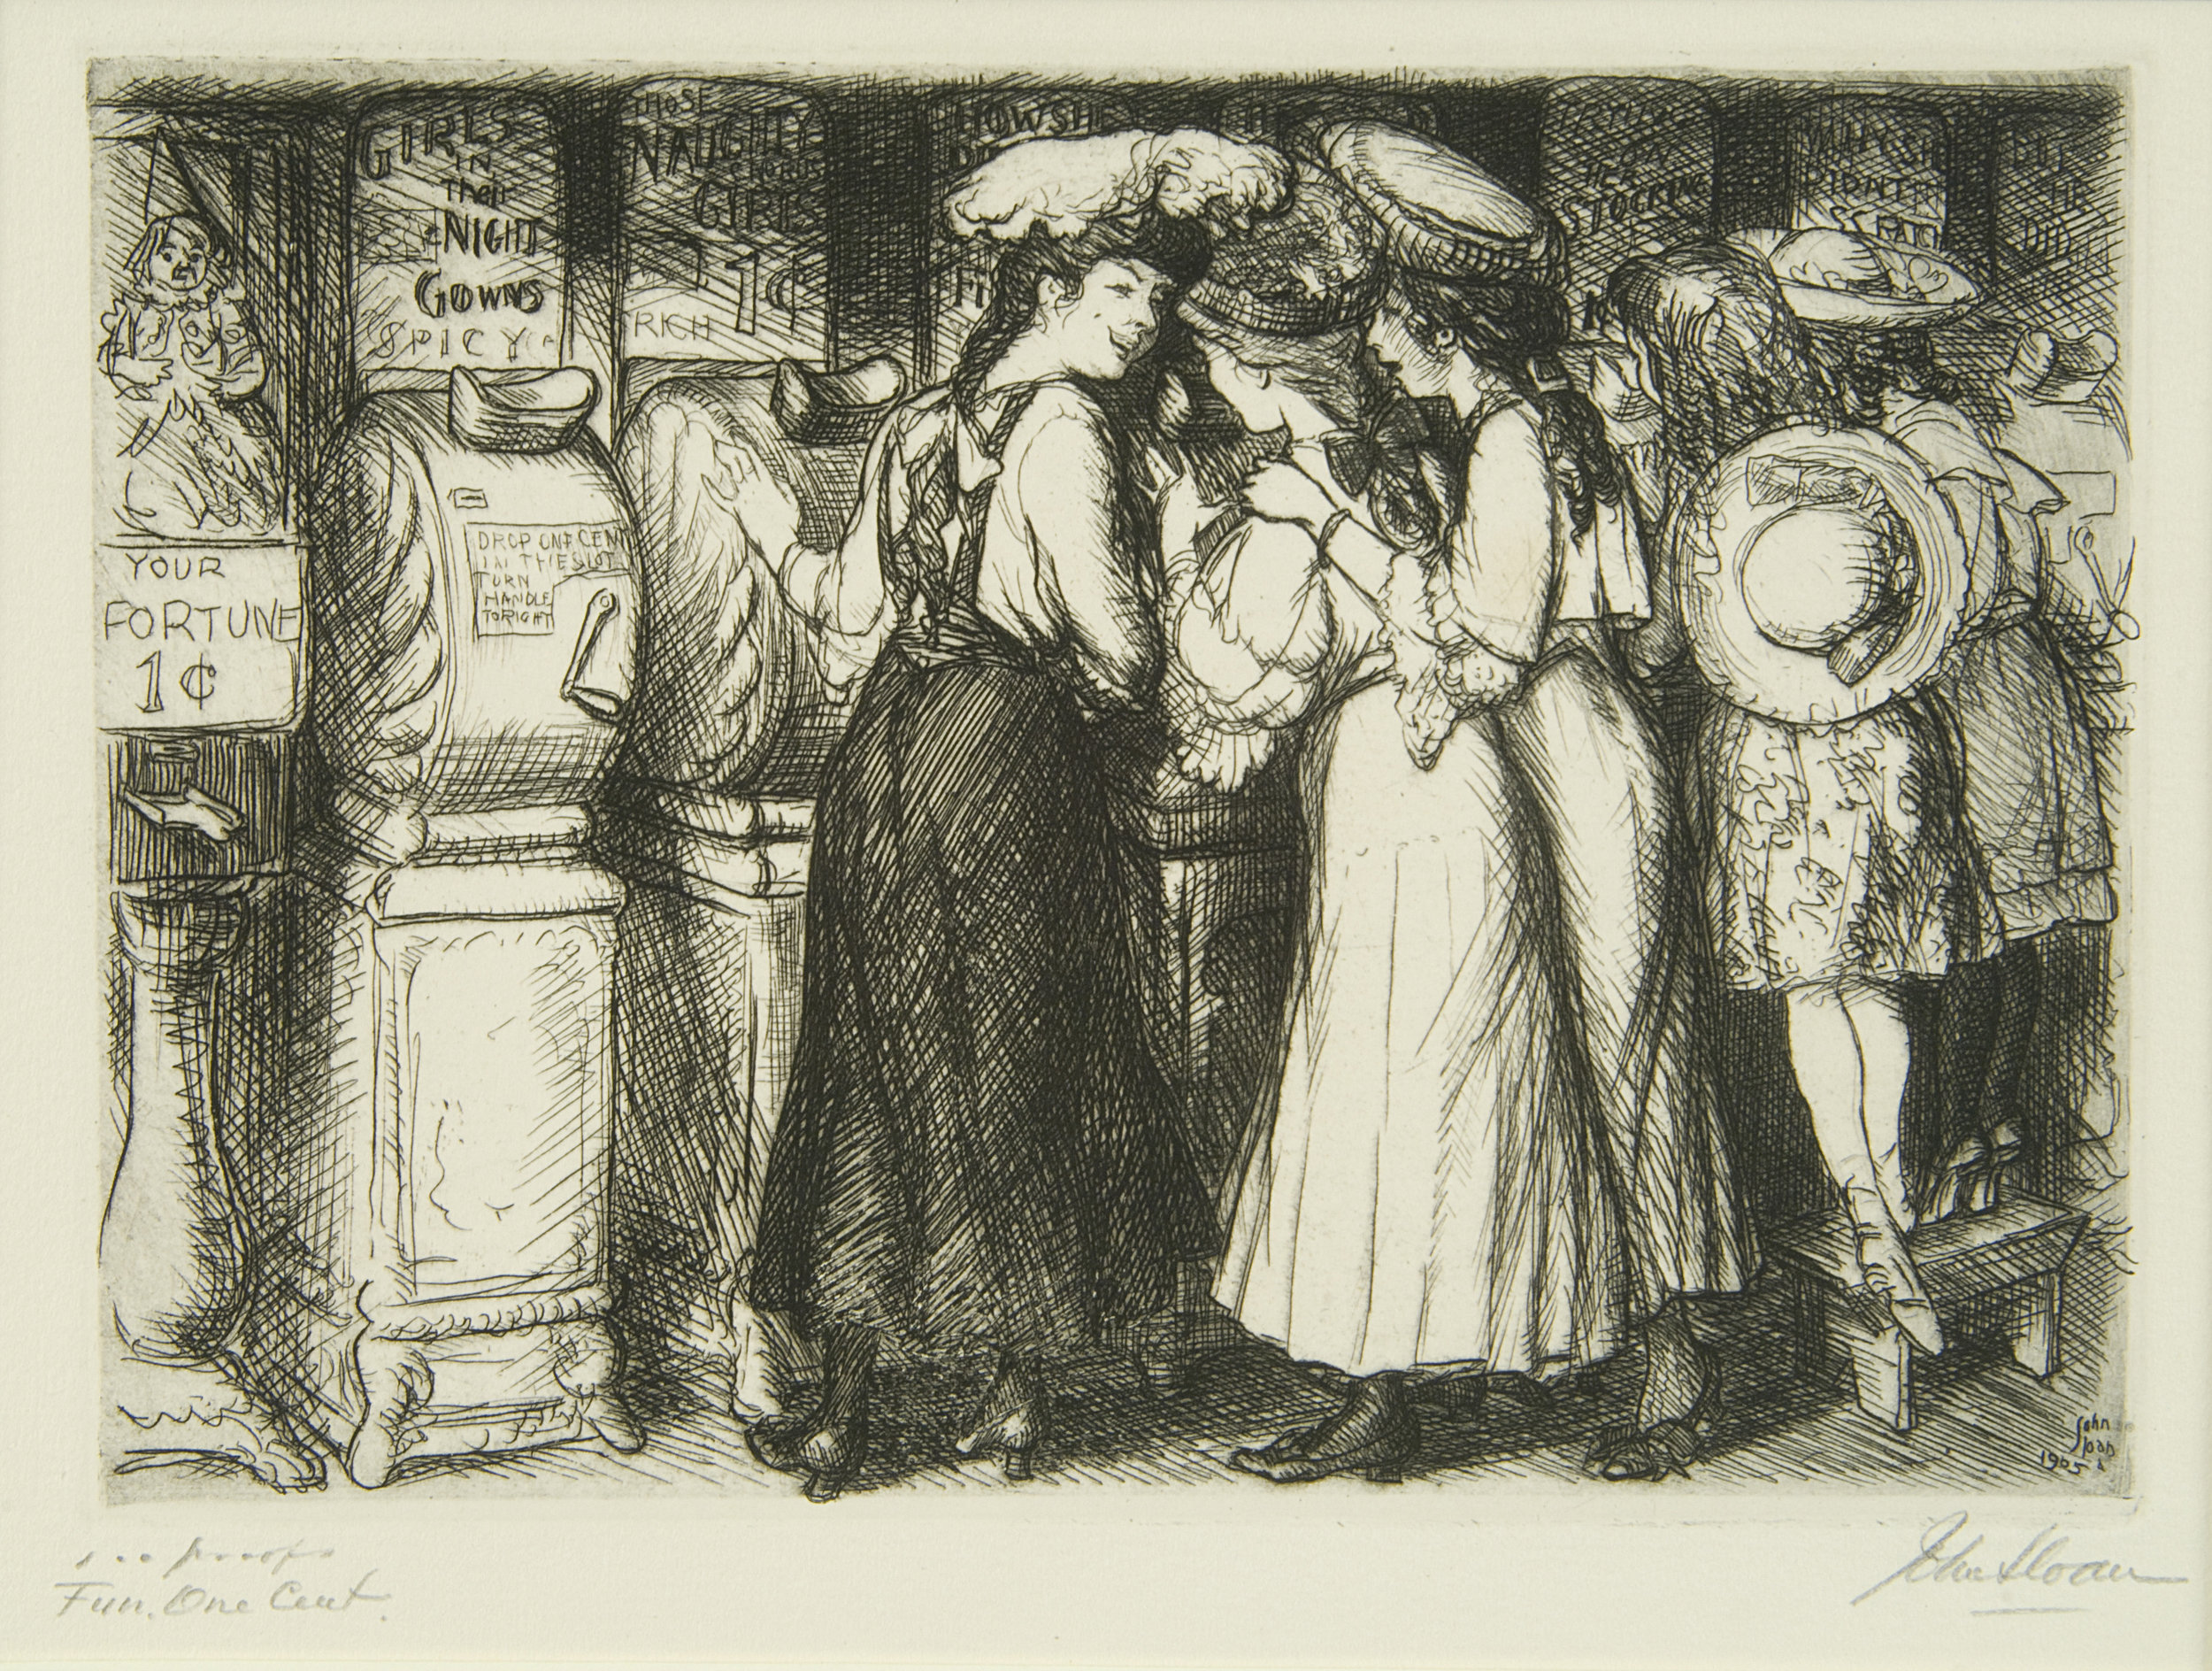 Etching of women looking at naughty images in a one-cent machine